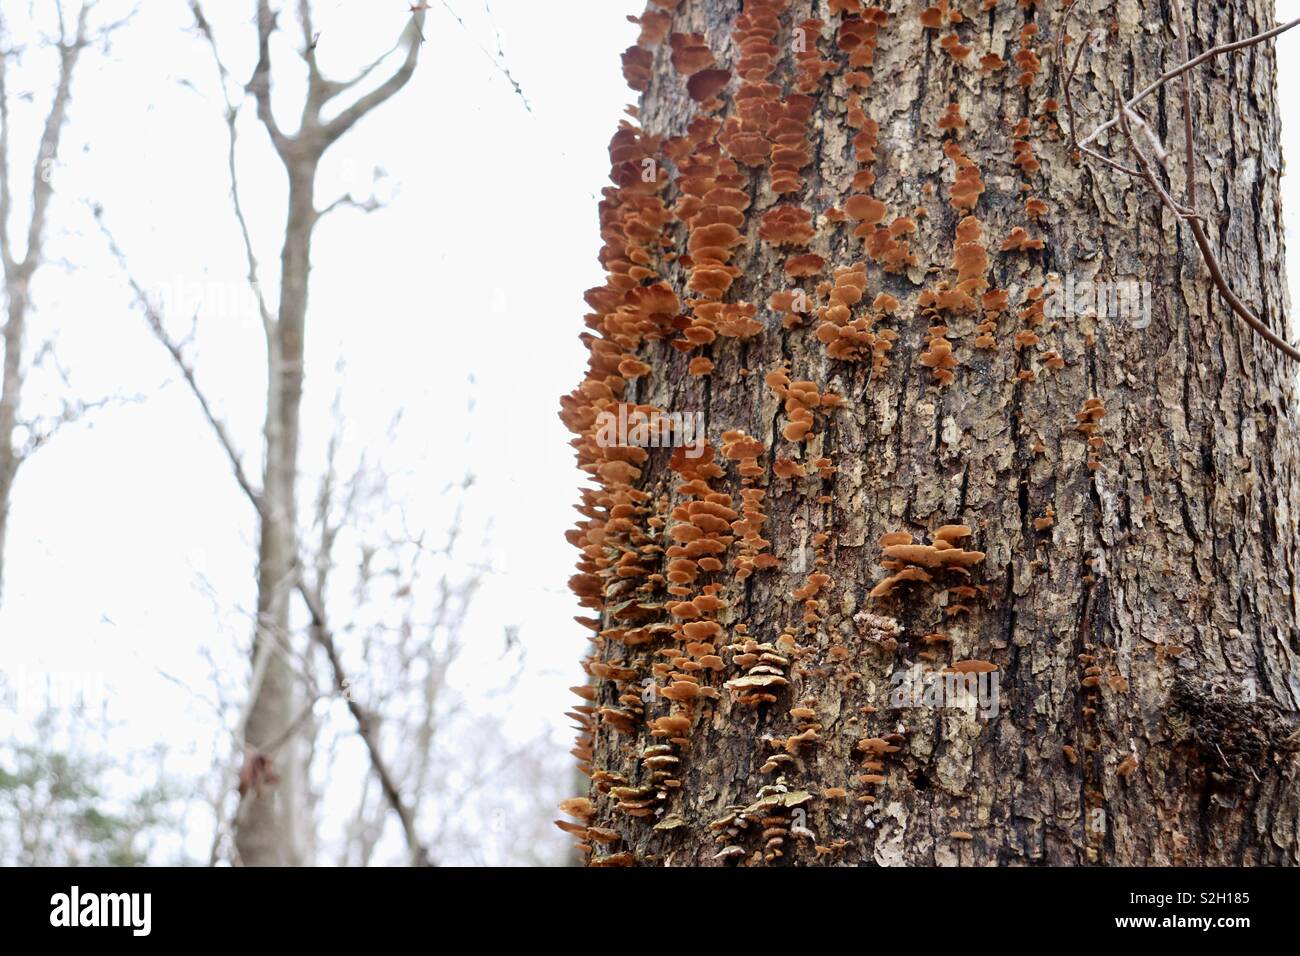 Closeup image of fungus growing on a tree trunk Stock Photo